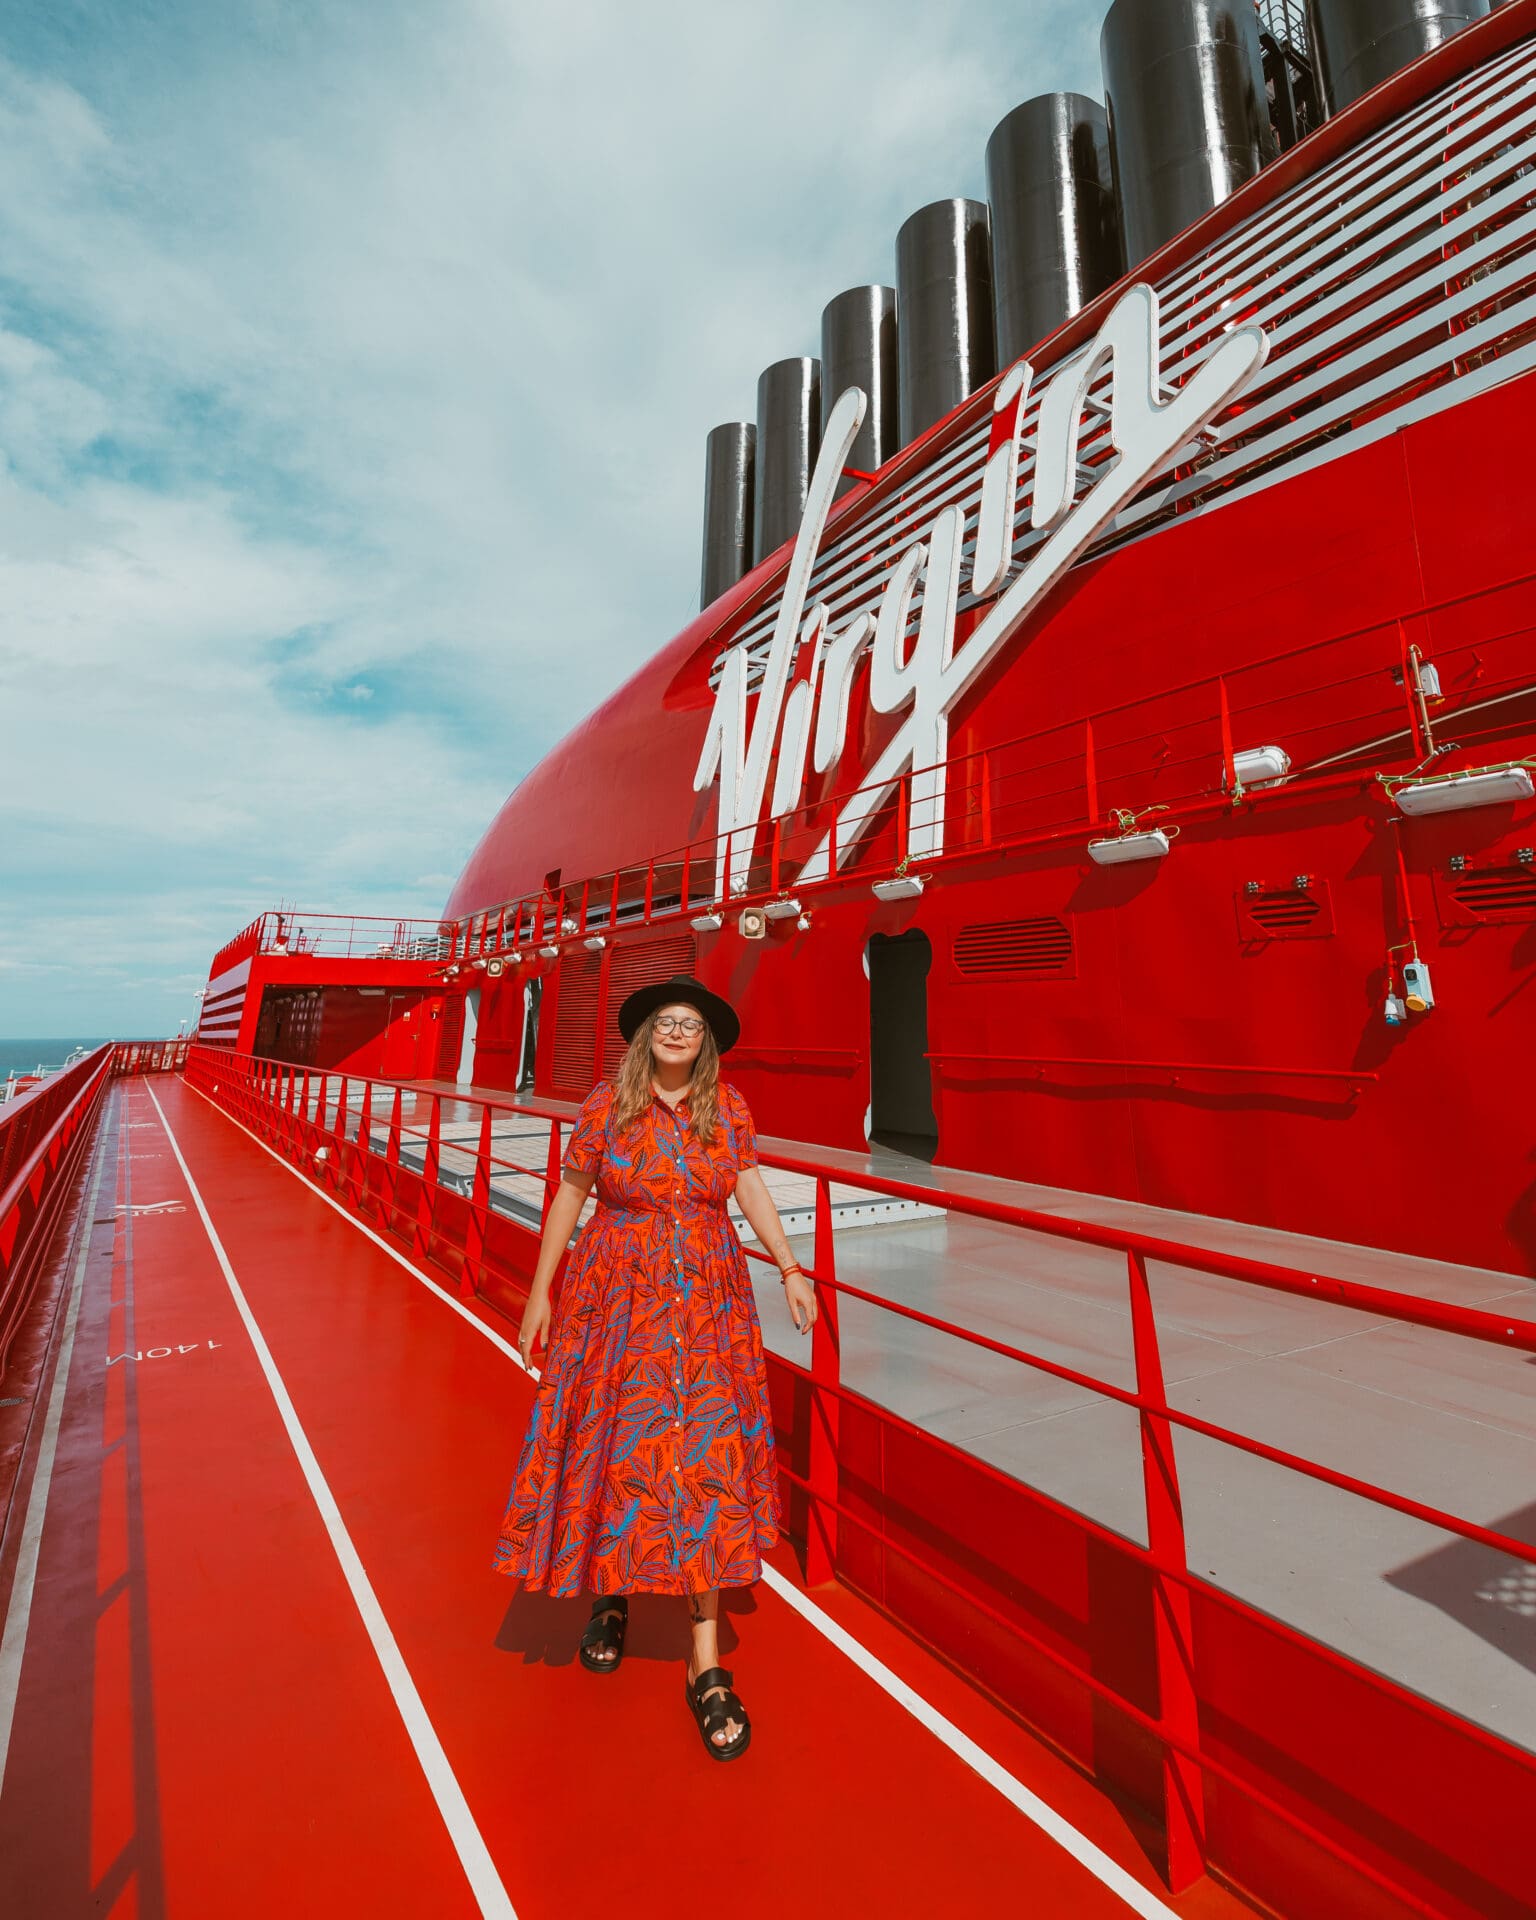 The Runway with the Virgin logo on Virgin Voyages